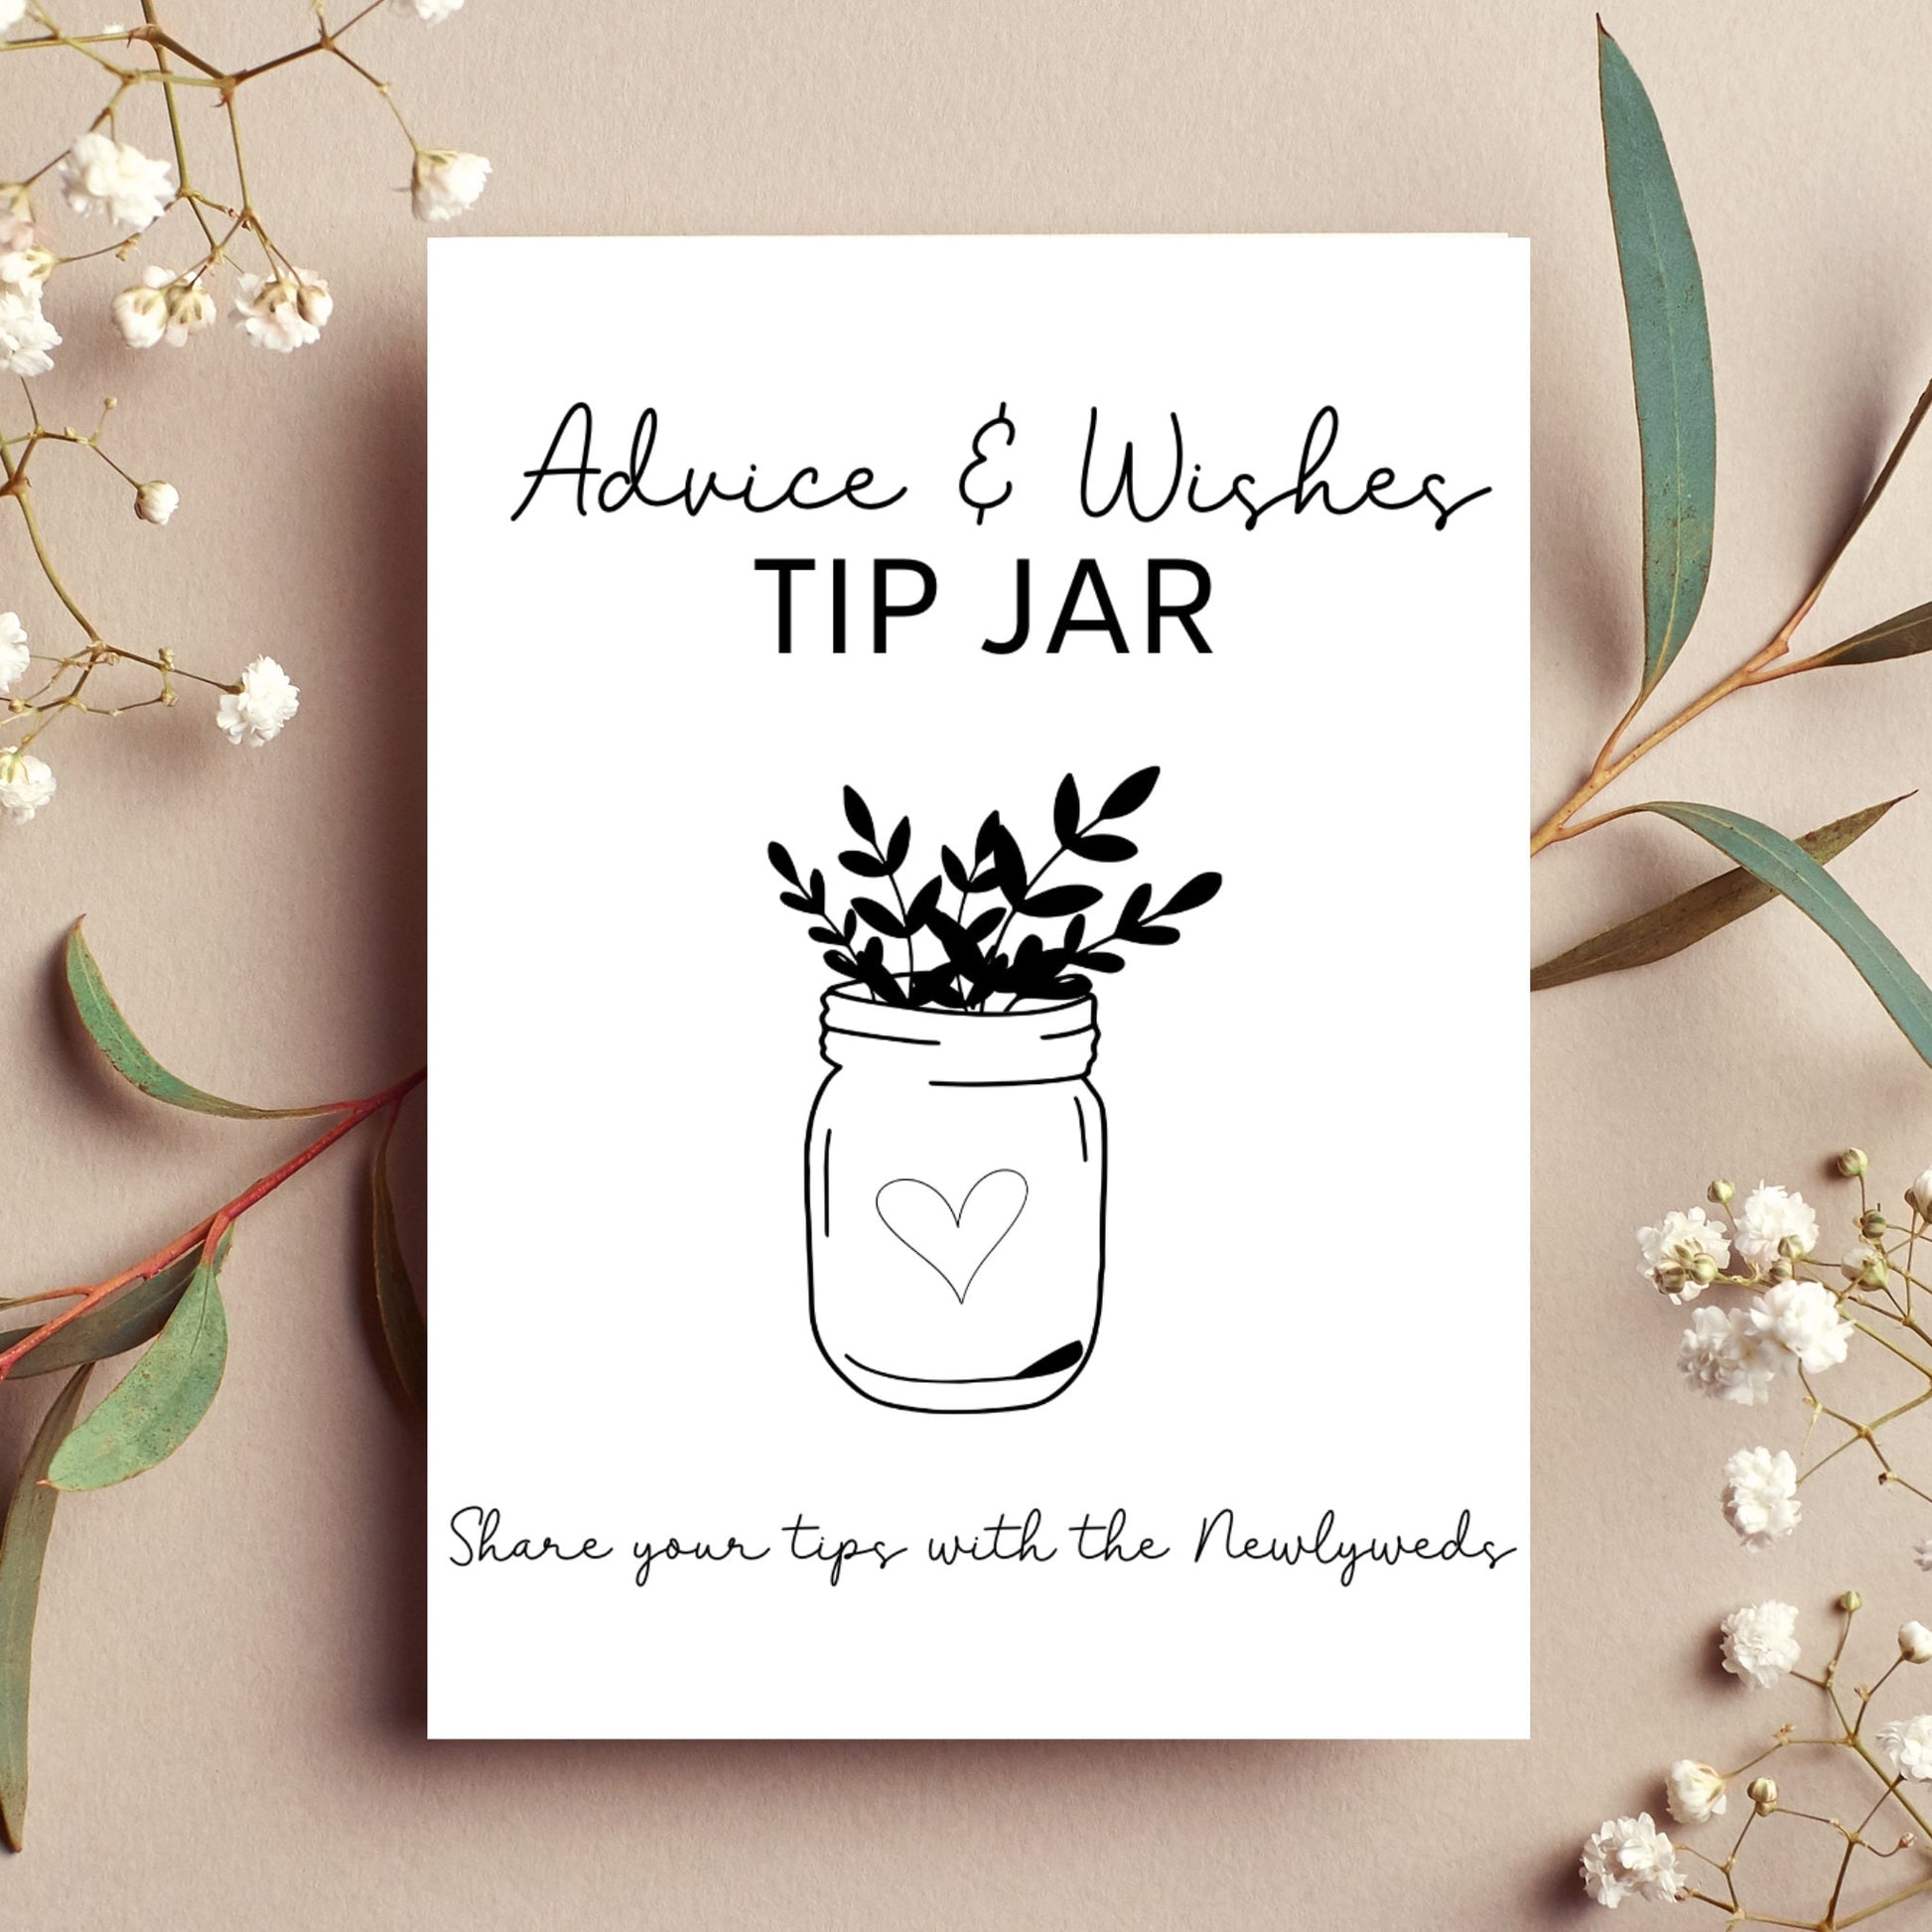 Wedding Advice Bride & Groom Well Wishes Card Printable, Minimalist Bridal Shower Party Game, Wedding Shower Couple Advice Tip Jar Sign